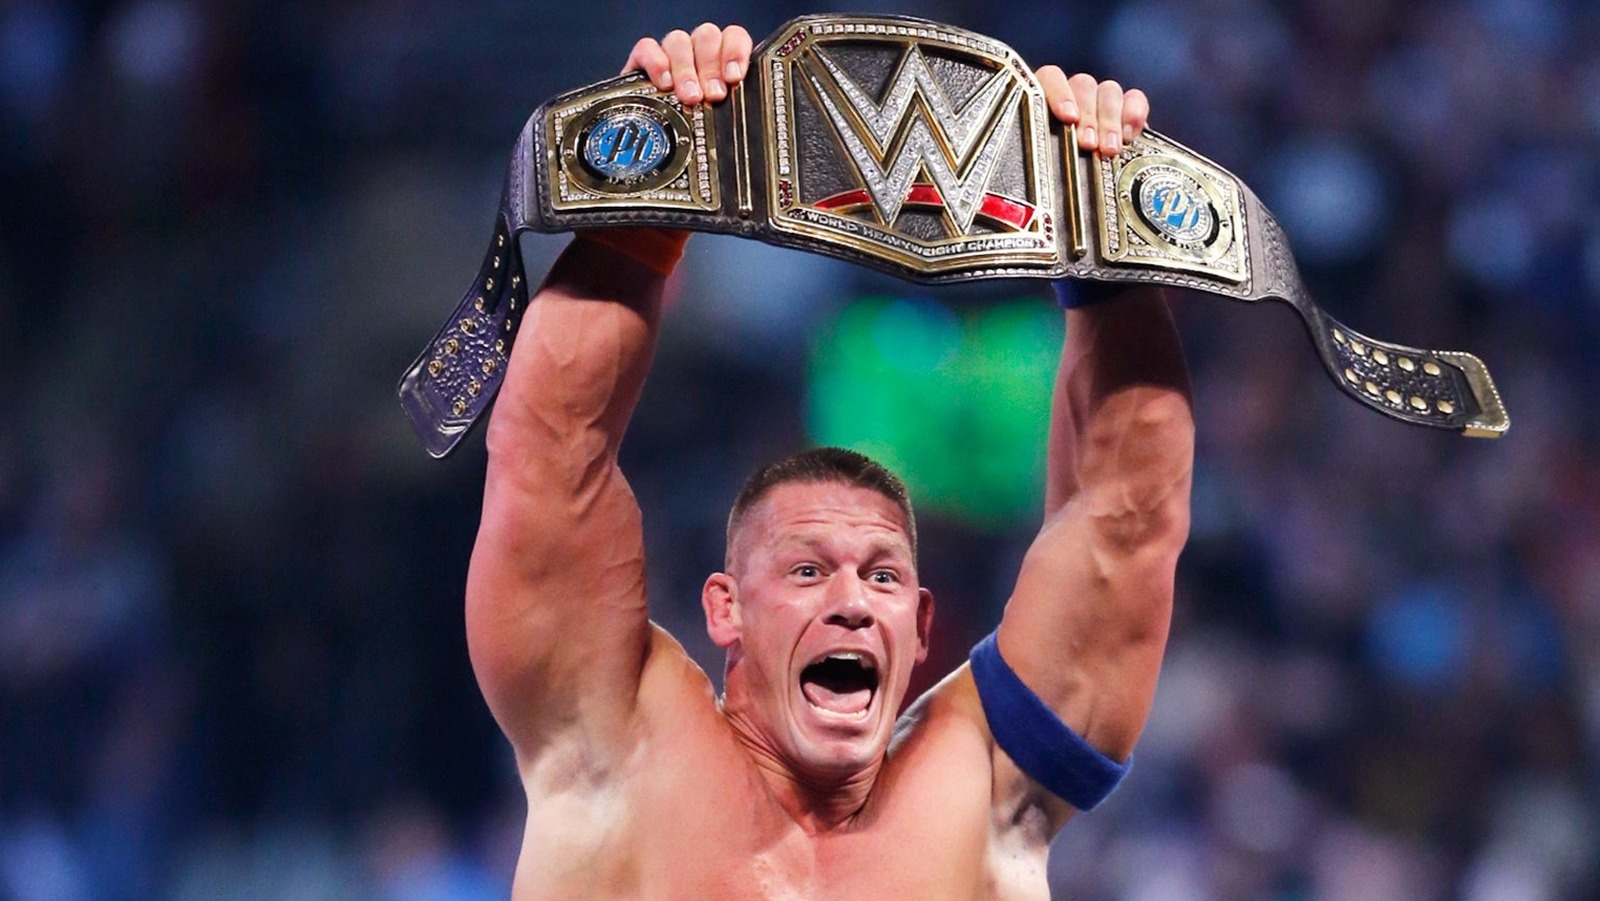 Chasing Glory: How John Cena Could Claim His Record-Breaking 17th World Title